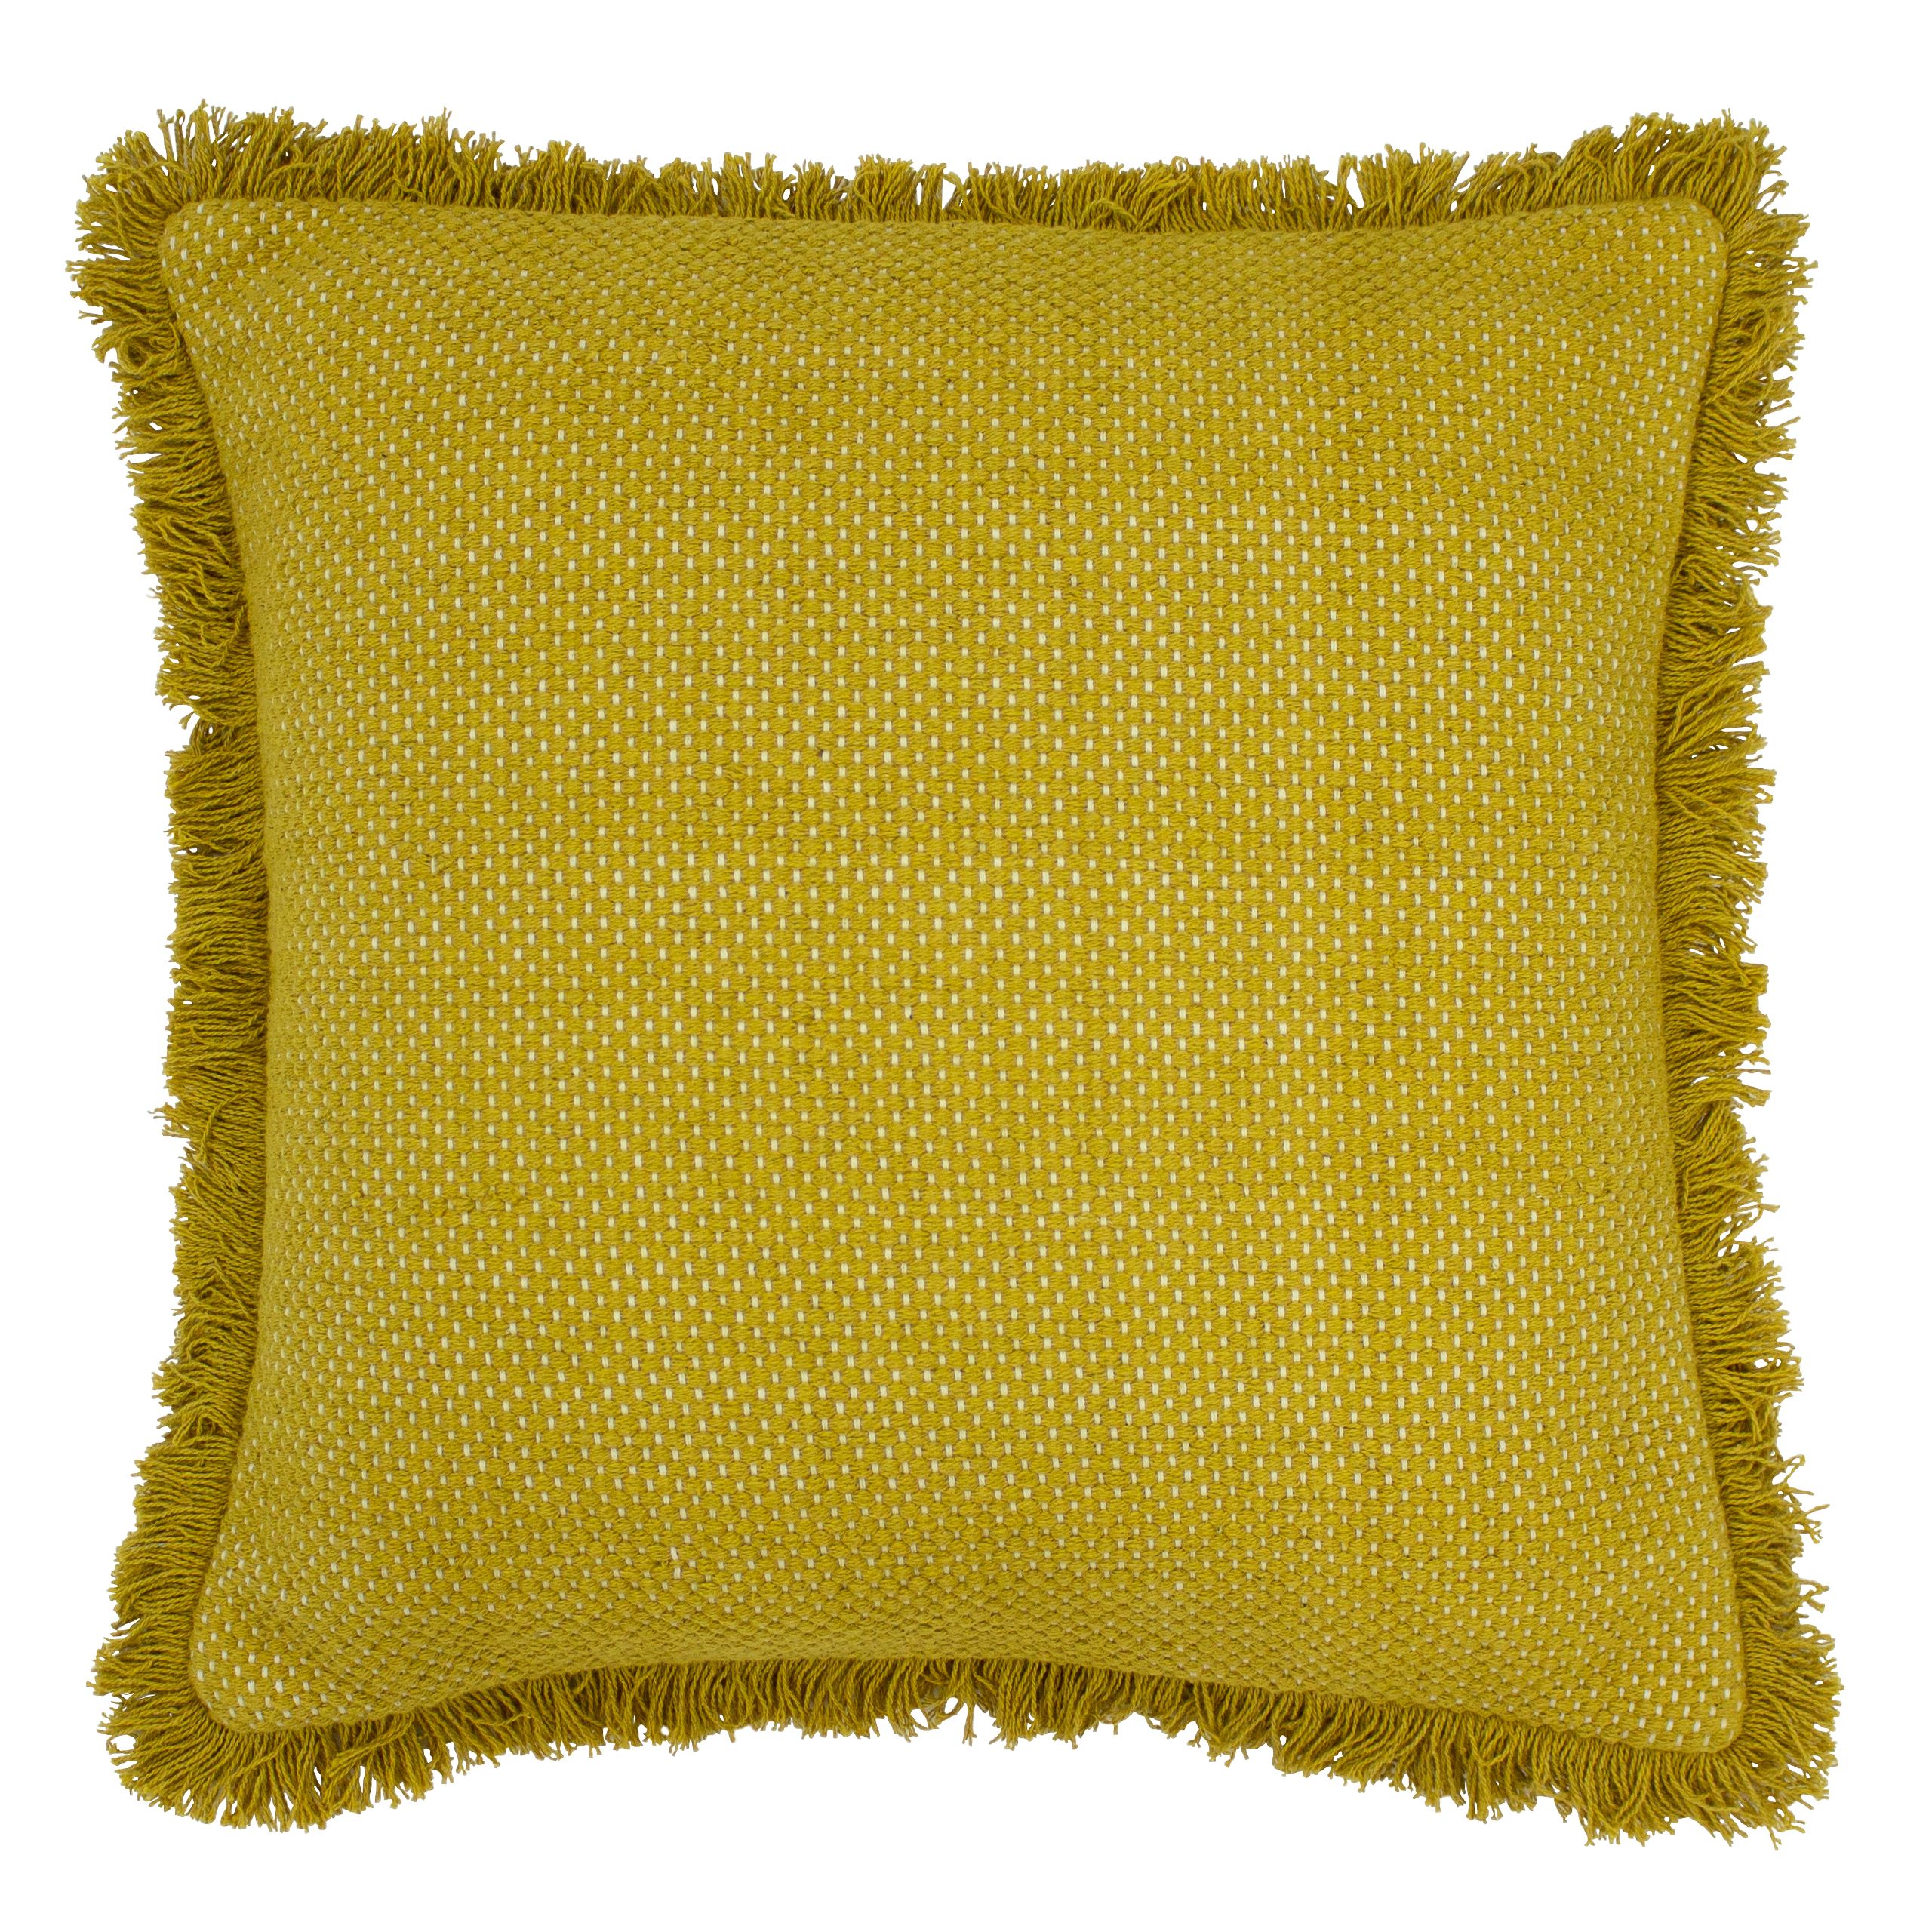 Wanting to uplift your living spaces? Add this textured fringe trimmed cushion to any contemporary or modern home for that perfect eye-catching look. Complete with twill woven stitching and a soft cotton fringe edge, this design will be a fabulous addition when moving into a spring interior for a refreshed look.